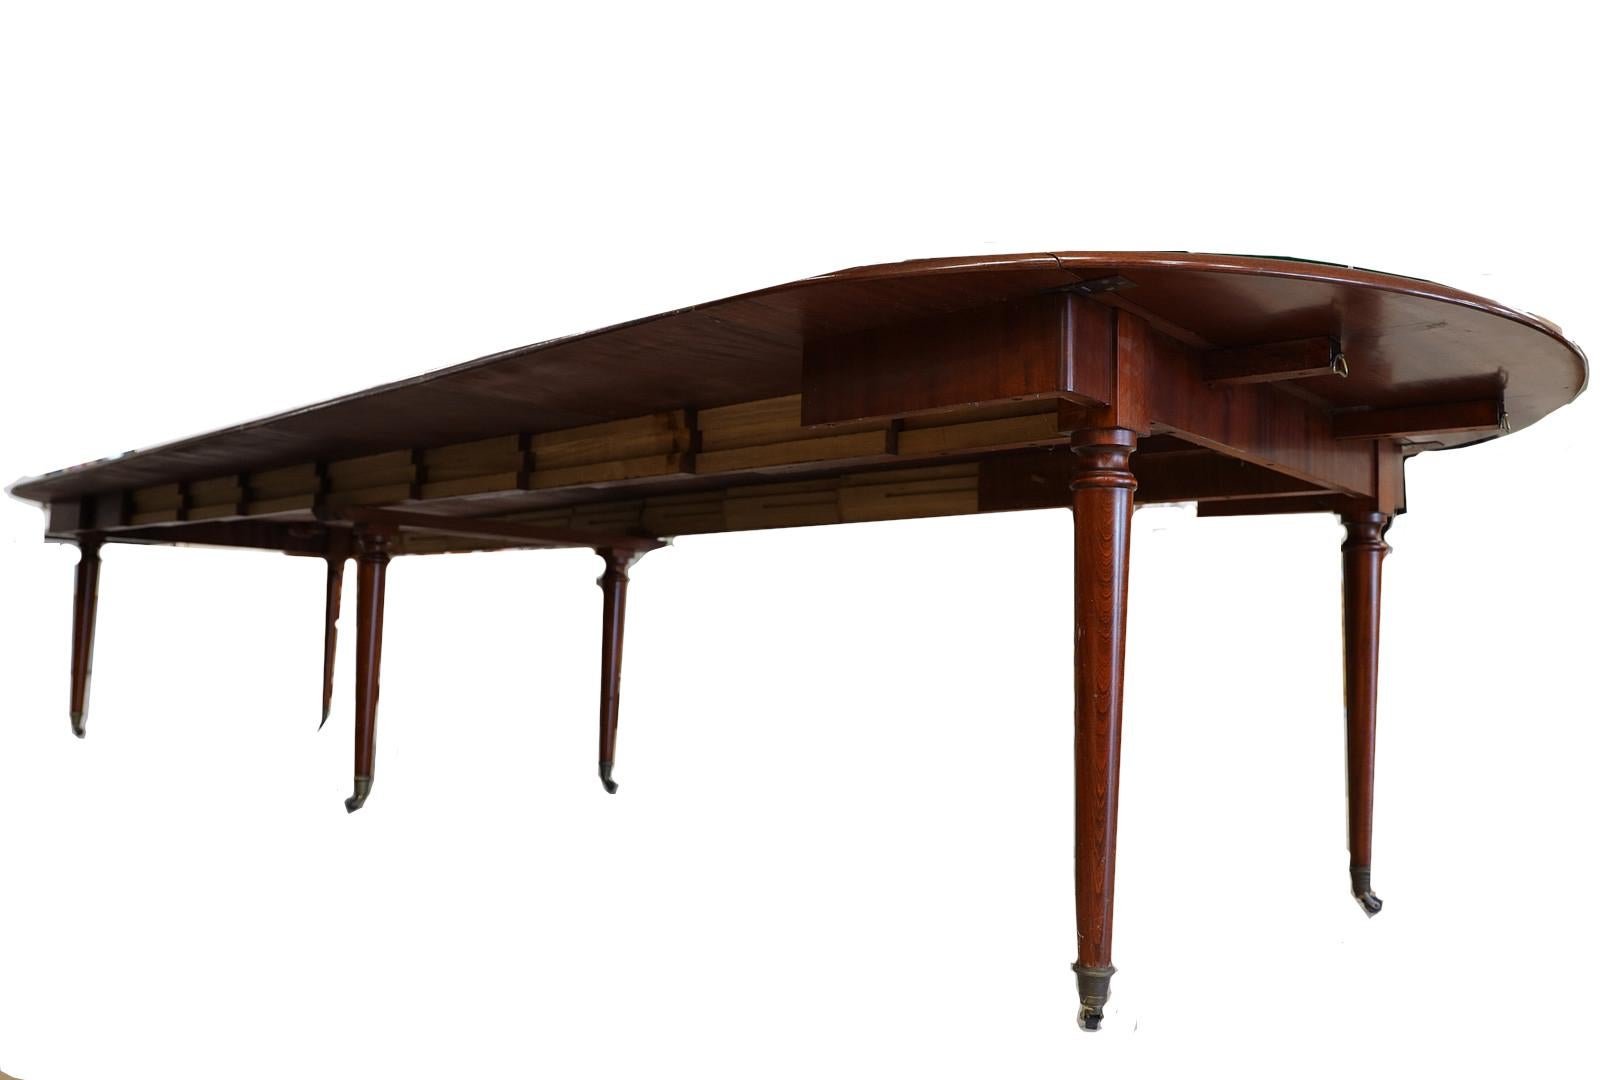 An English George the II styled dining table with oval drop leaf ends supported by slides and five 24